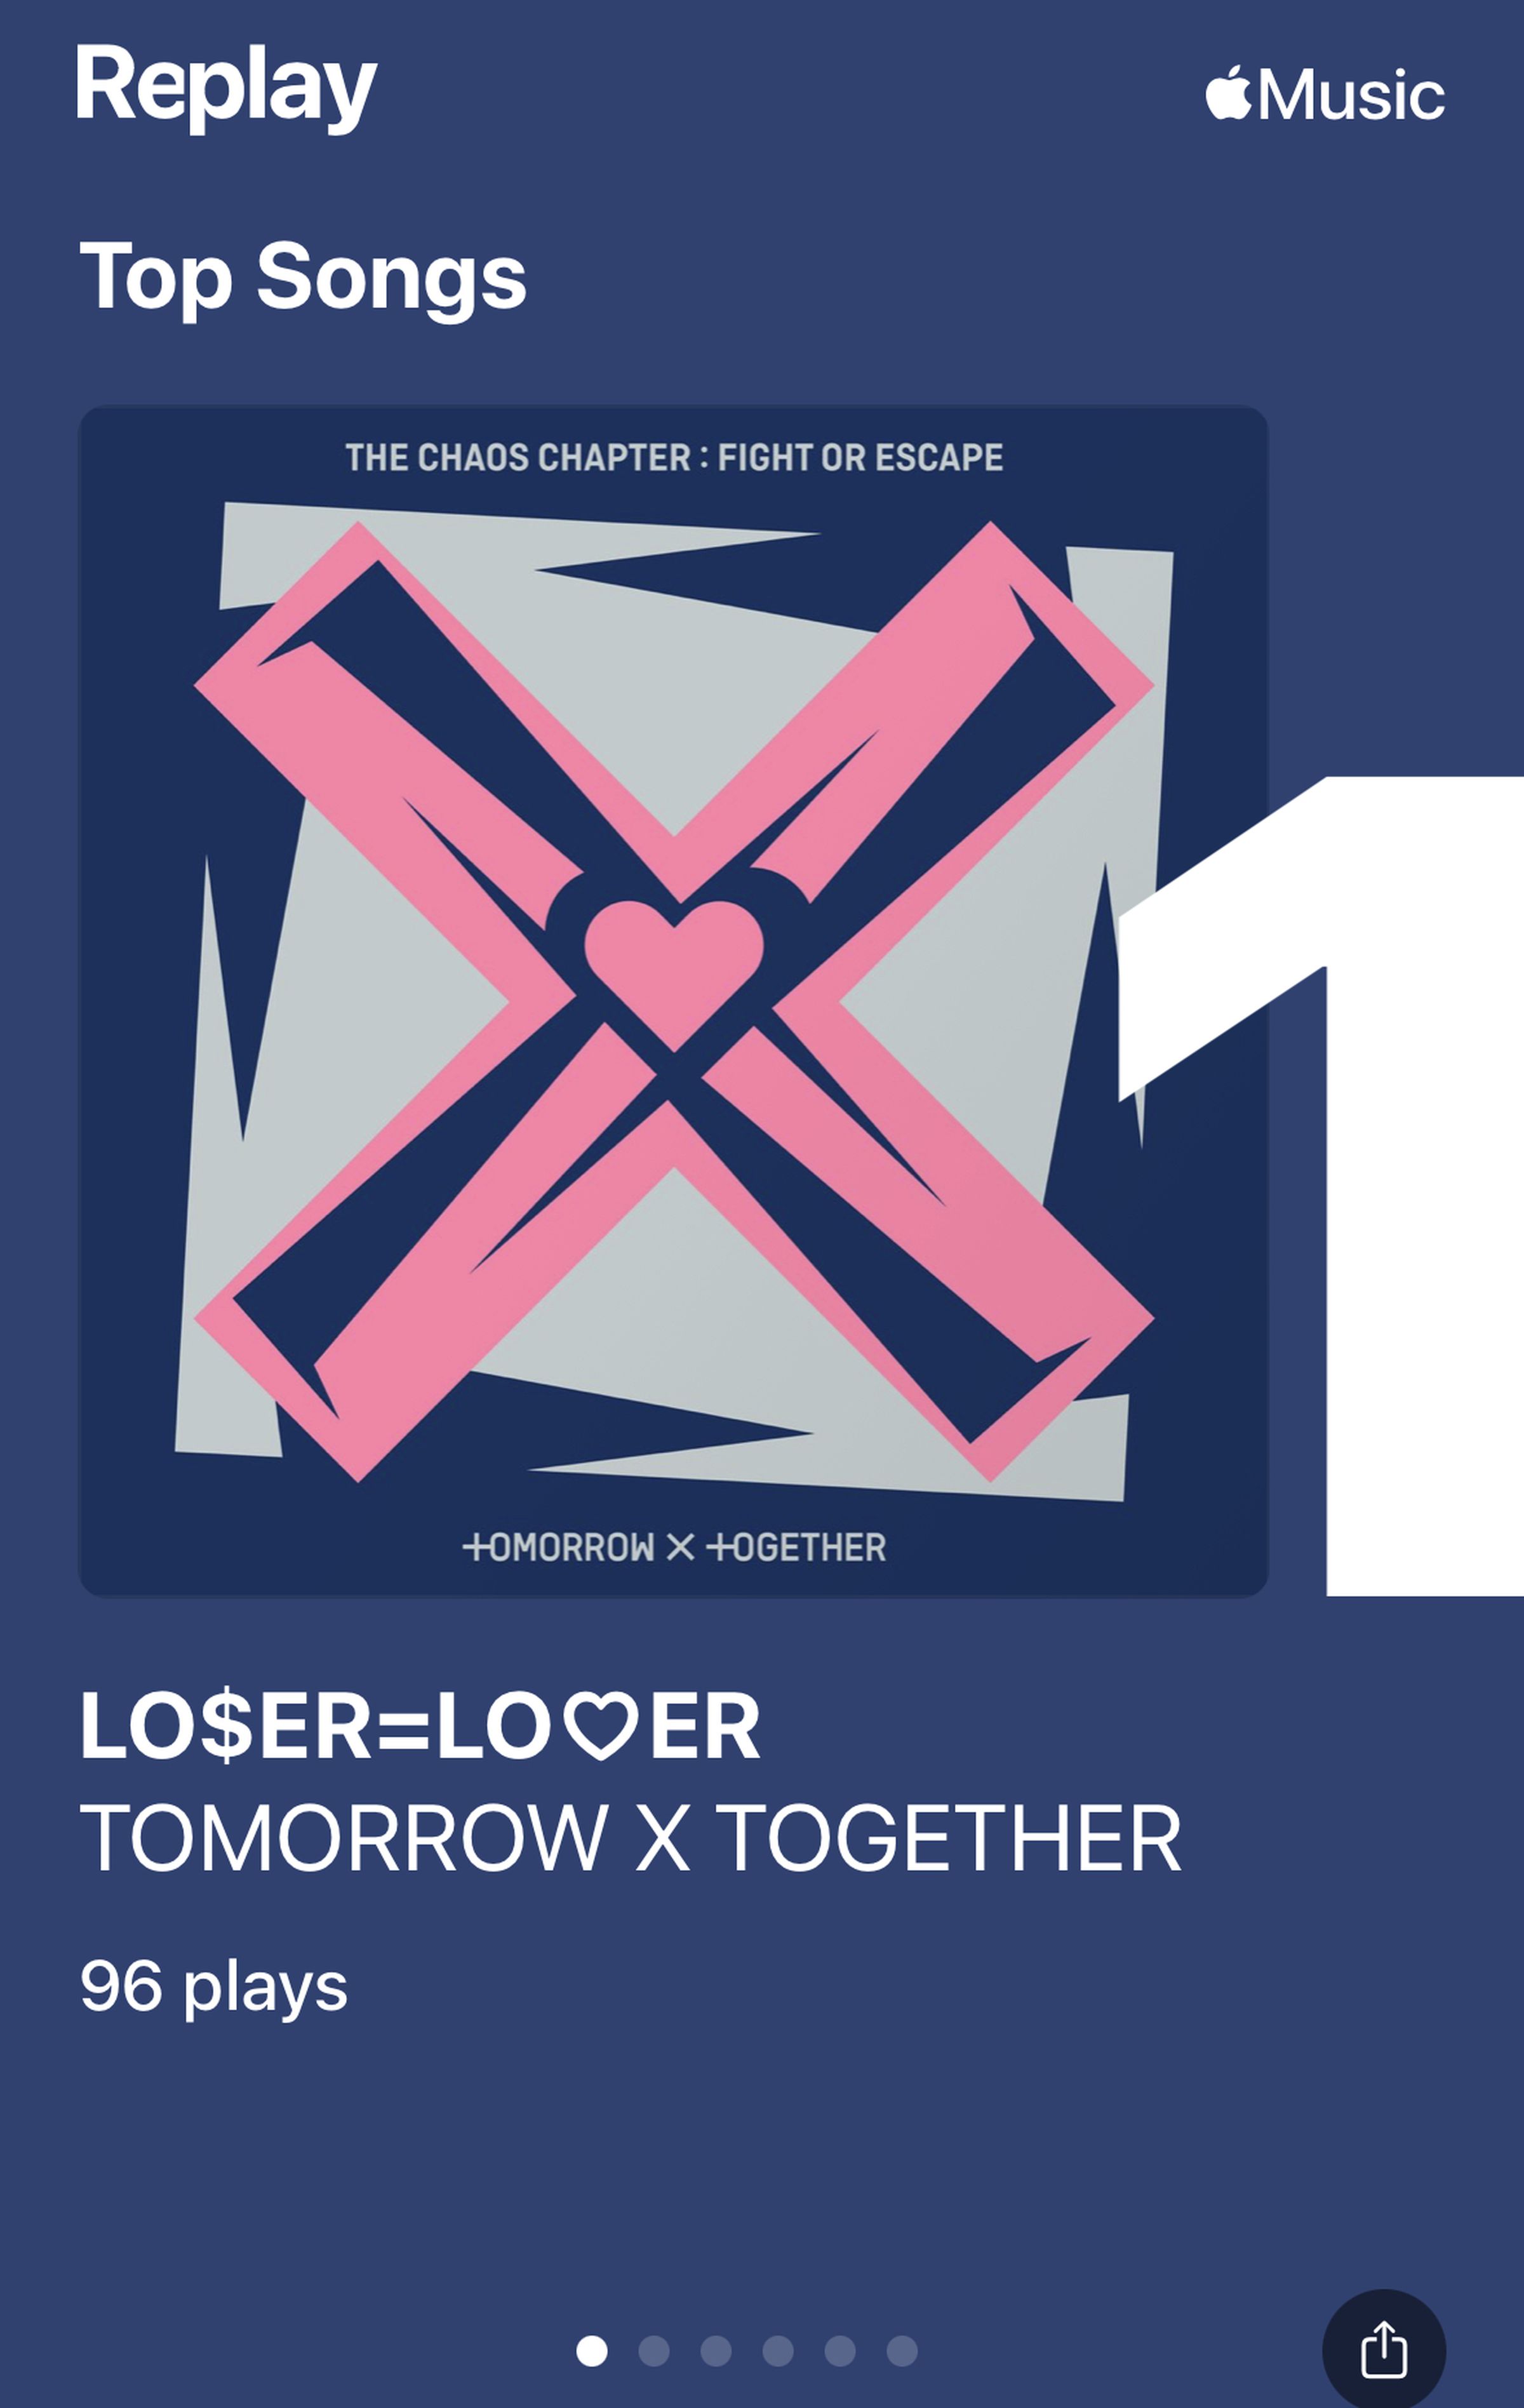 A screenshot of Apple Music Replay Top Songs showing number one as Loser = Lover by Tomorrow X Together.